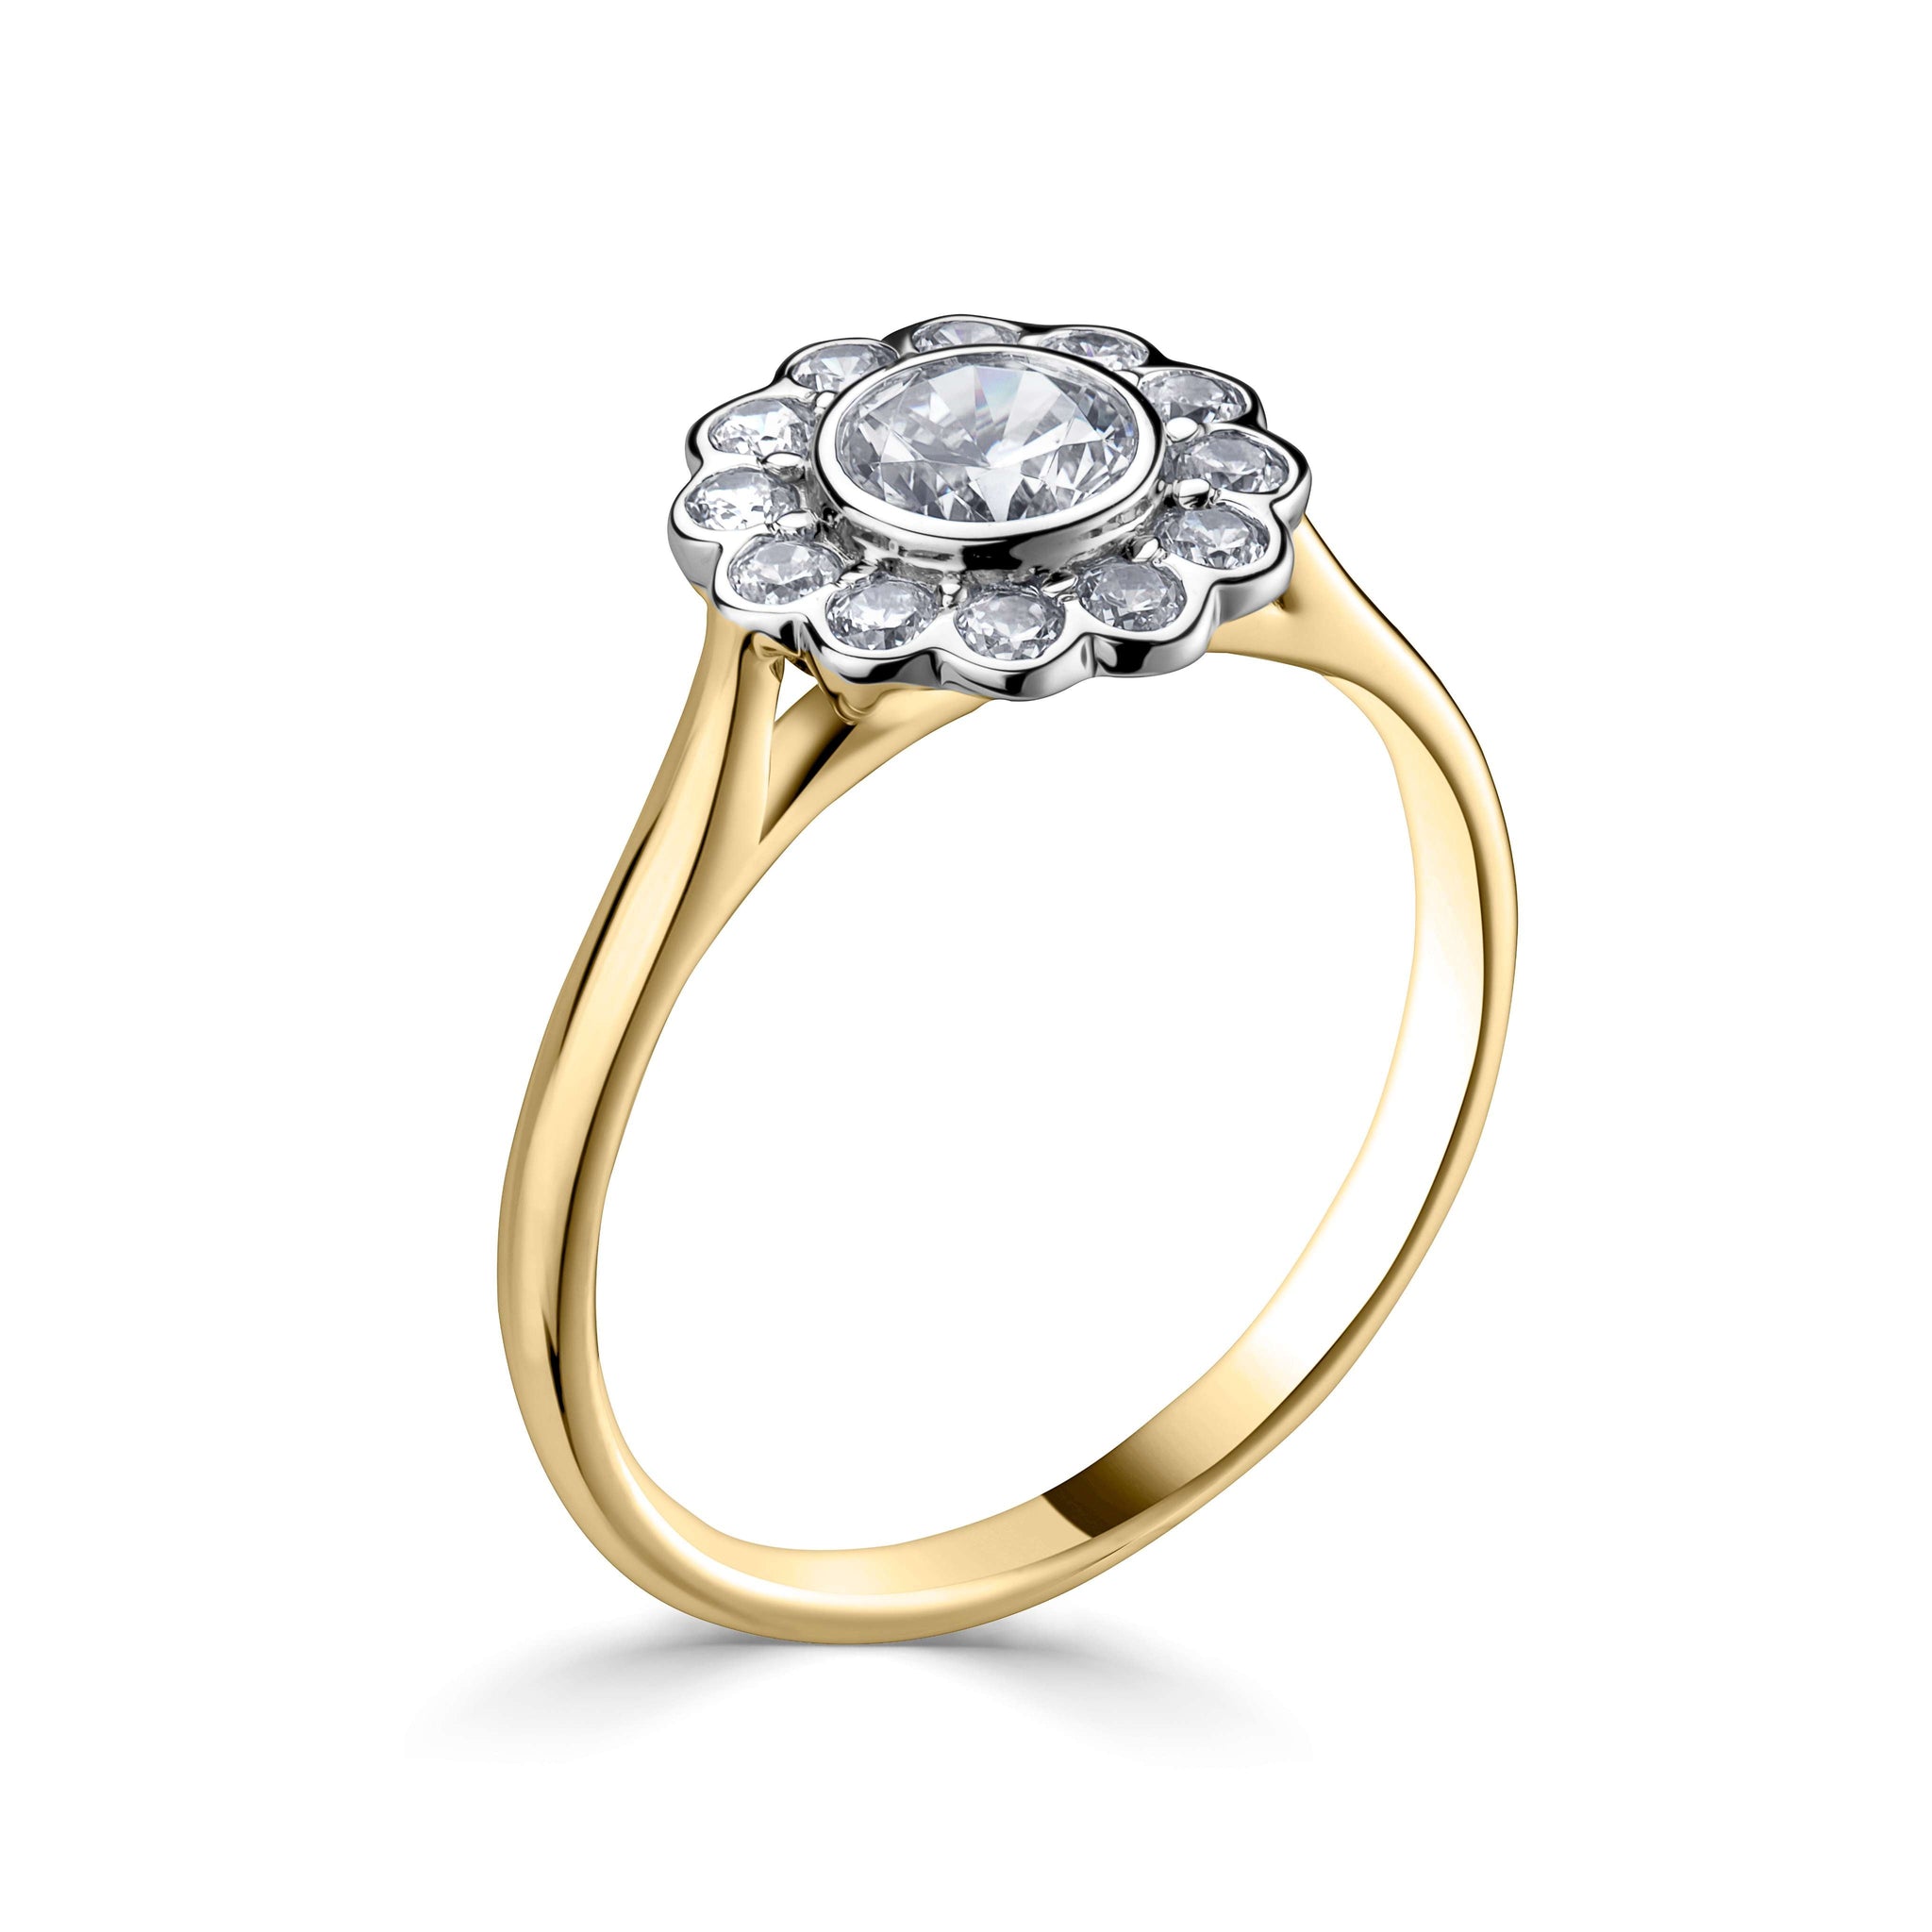 Lana *Select a Round Diamond 0.25ct or above